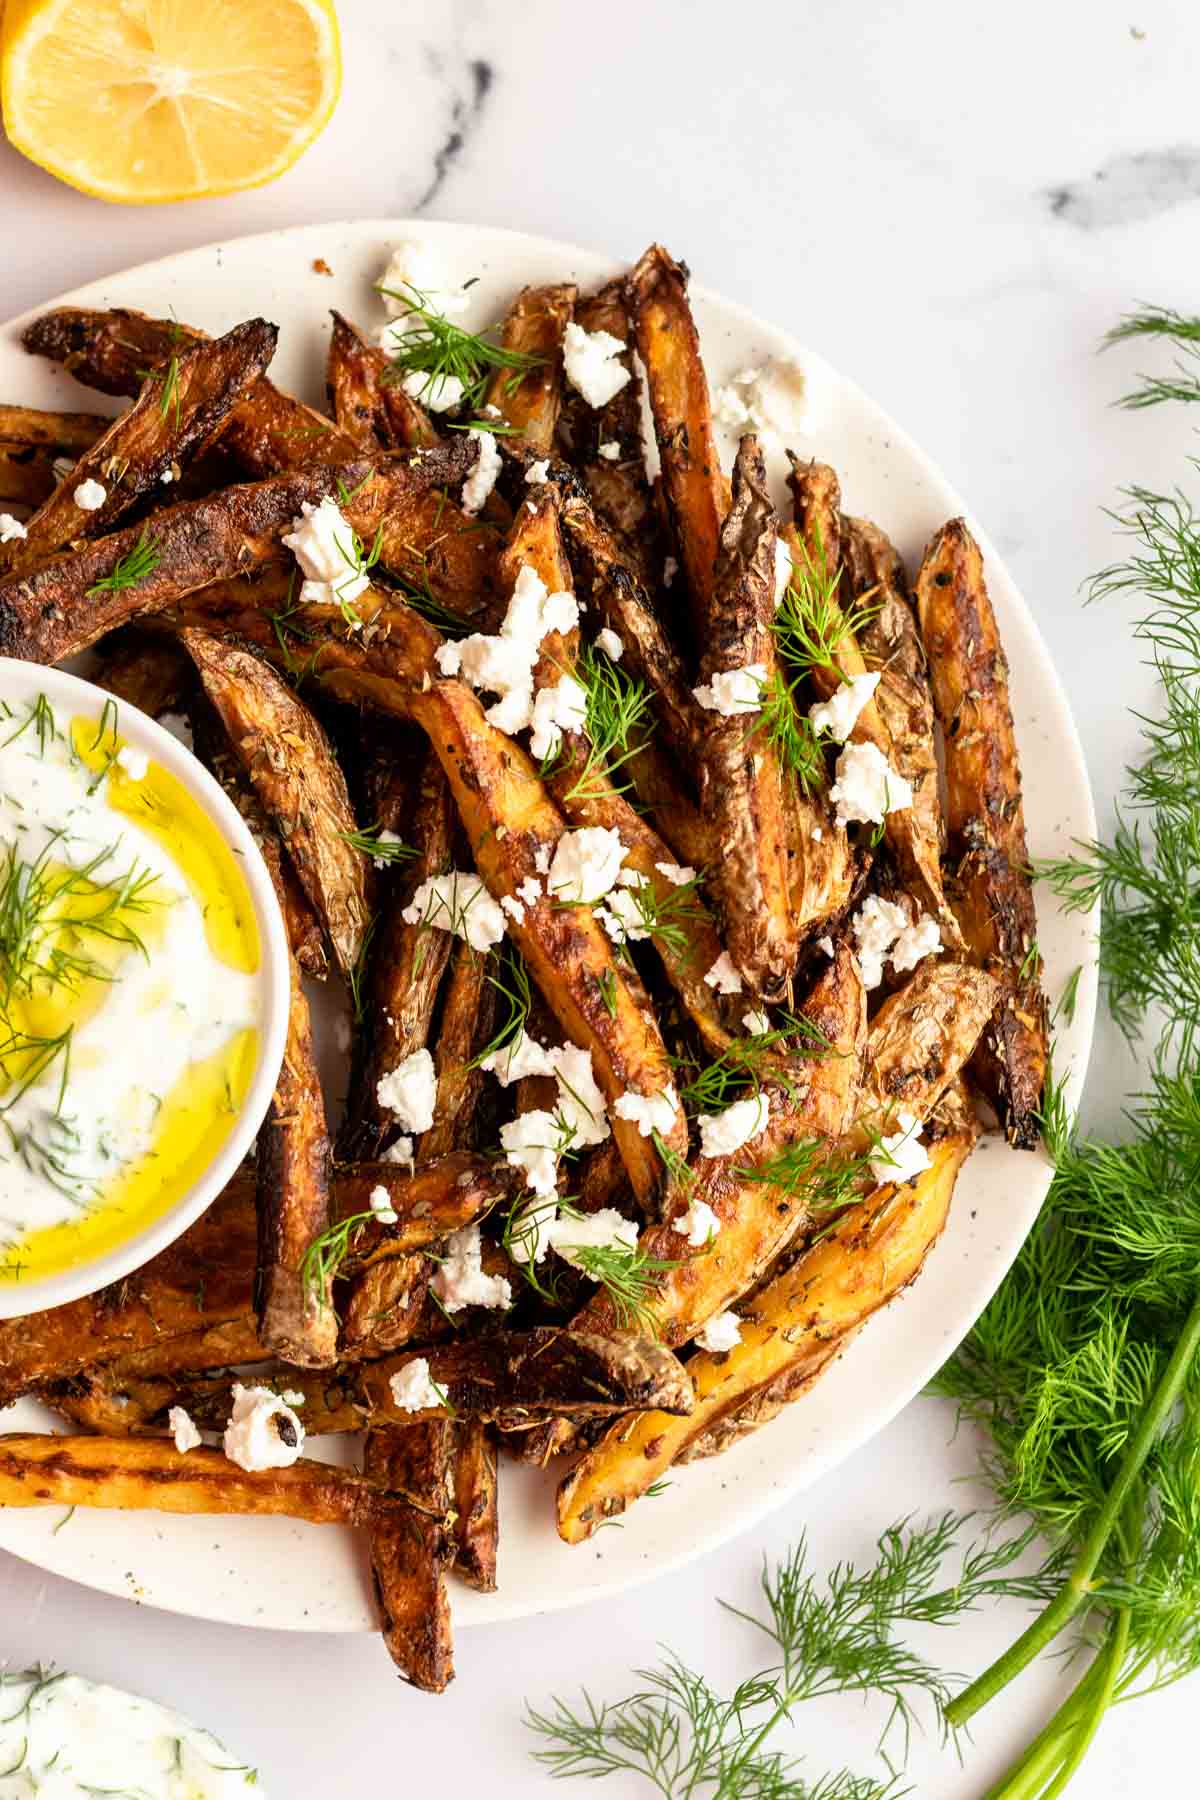 Large plate filled with baked greek fries next to a bowl with yogurt dill sauce.